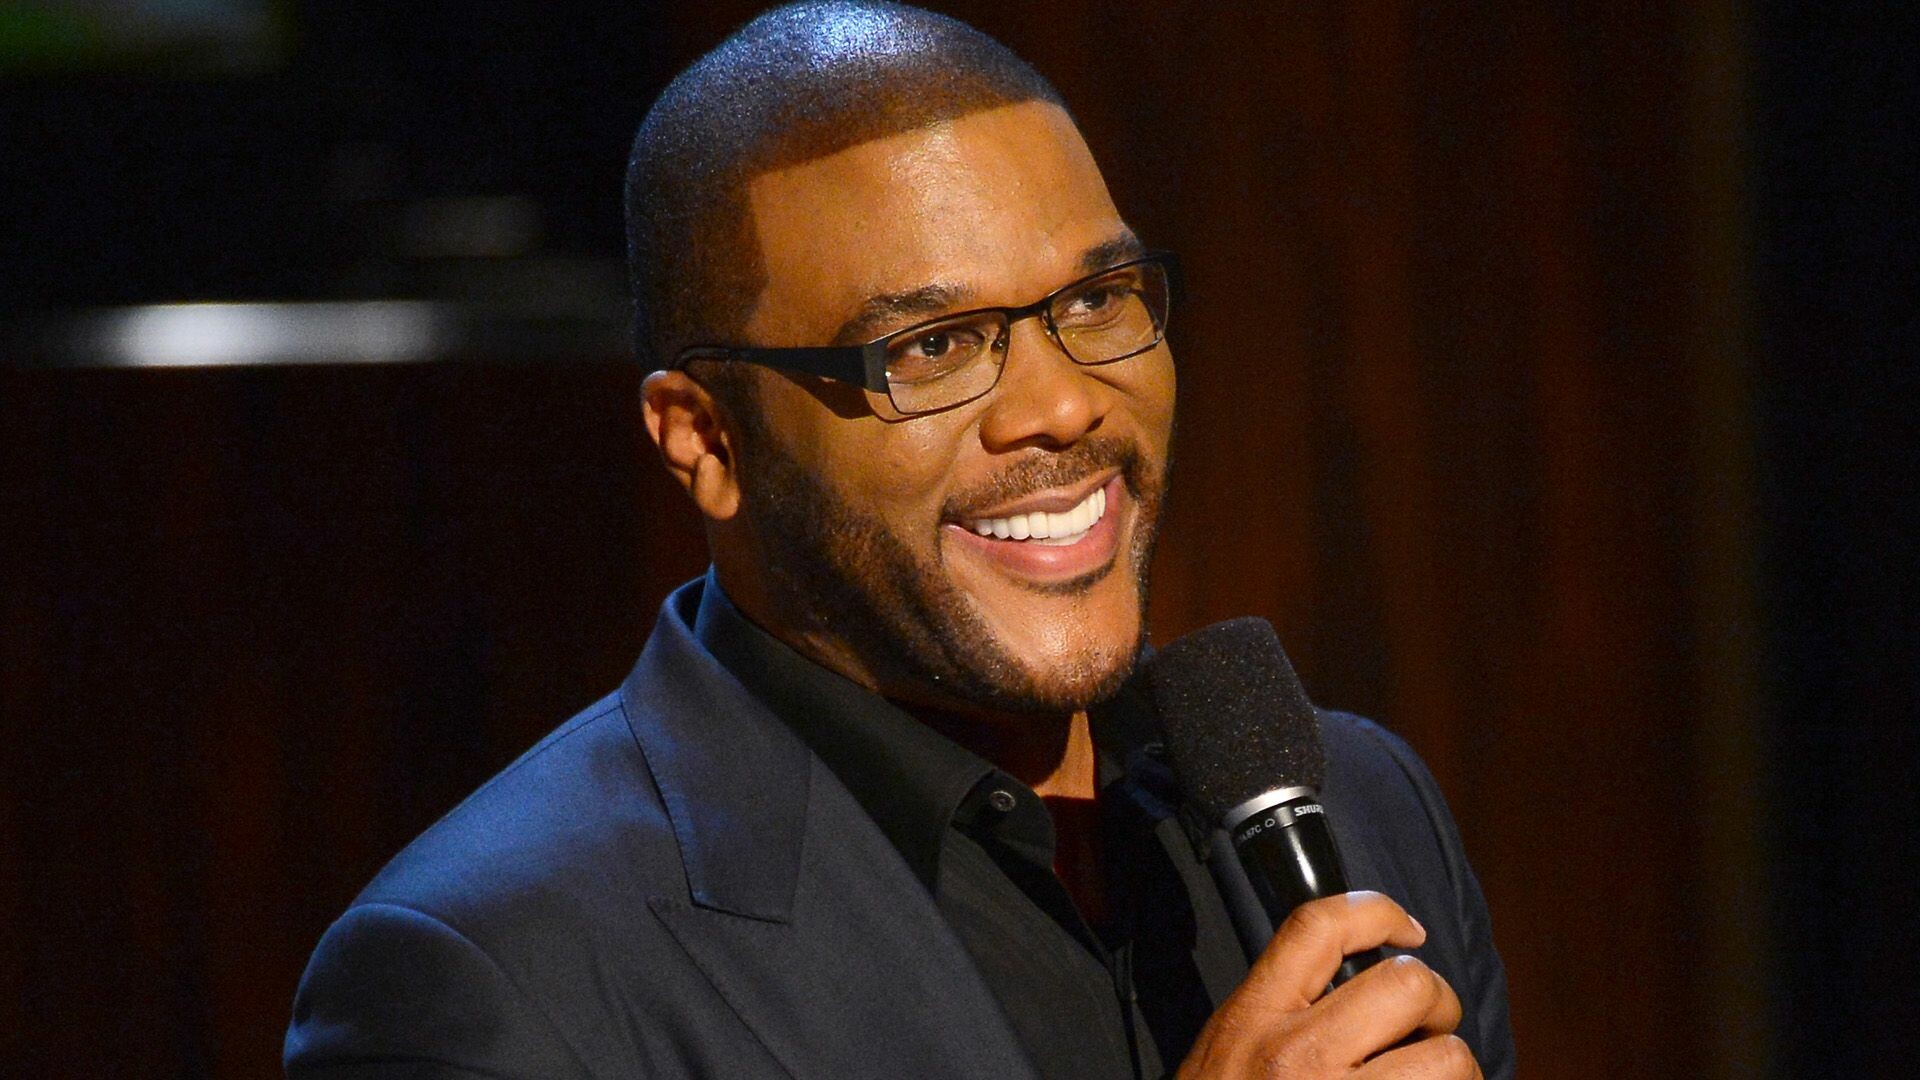 Tyler Perry Wallpapers (18+ images inside)